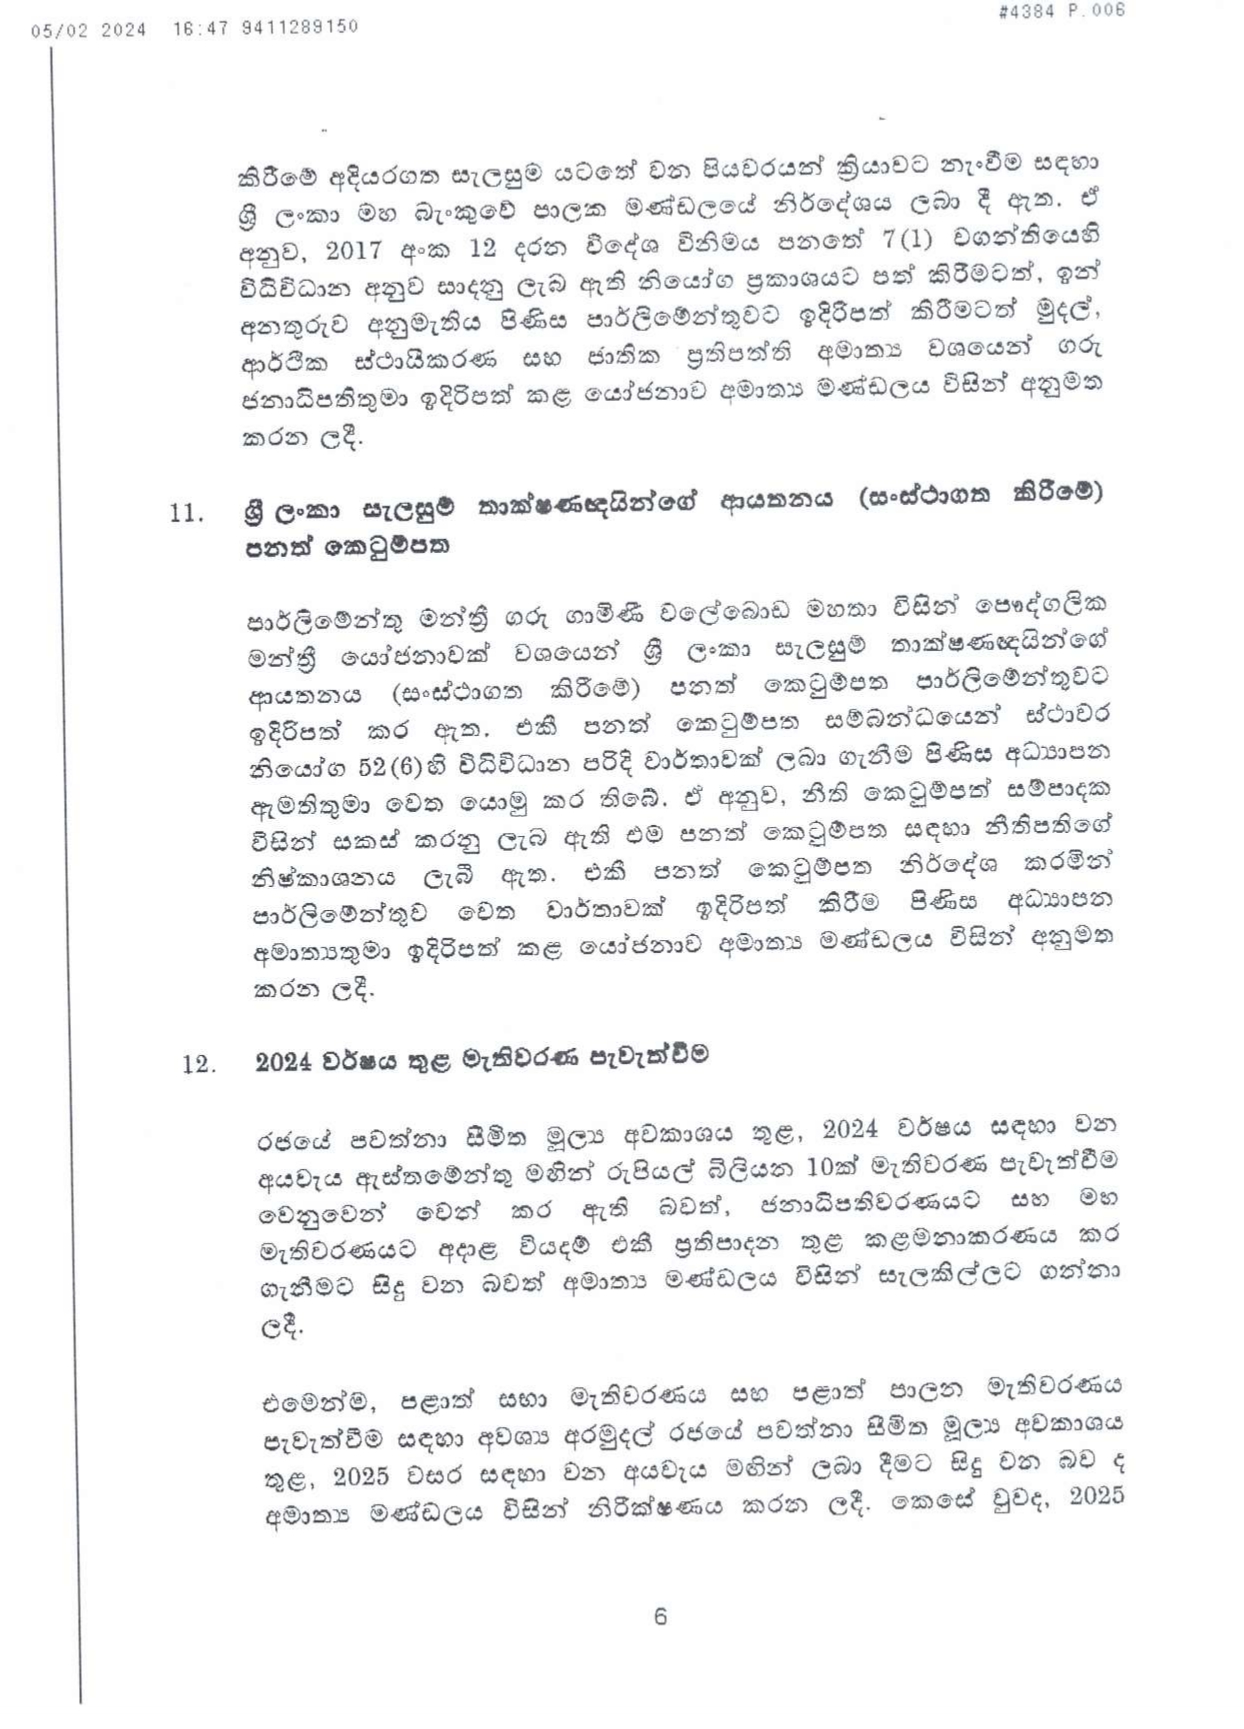 Cabinet Decision on 05.02.2024 page 0006